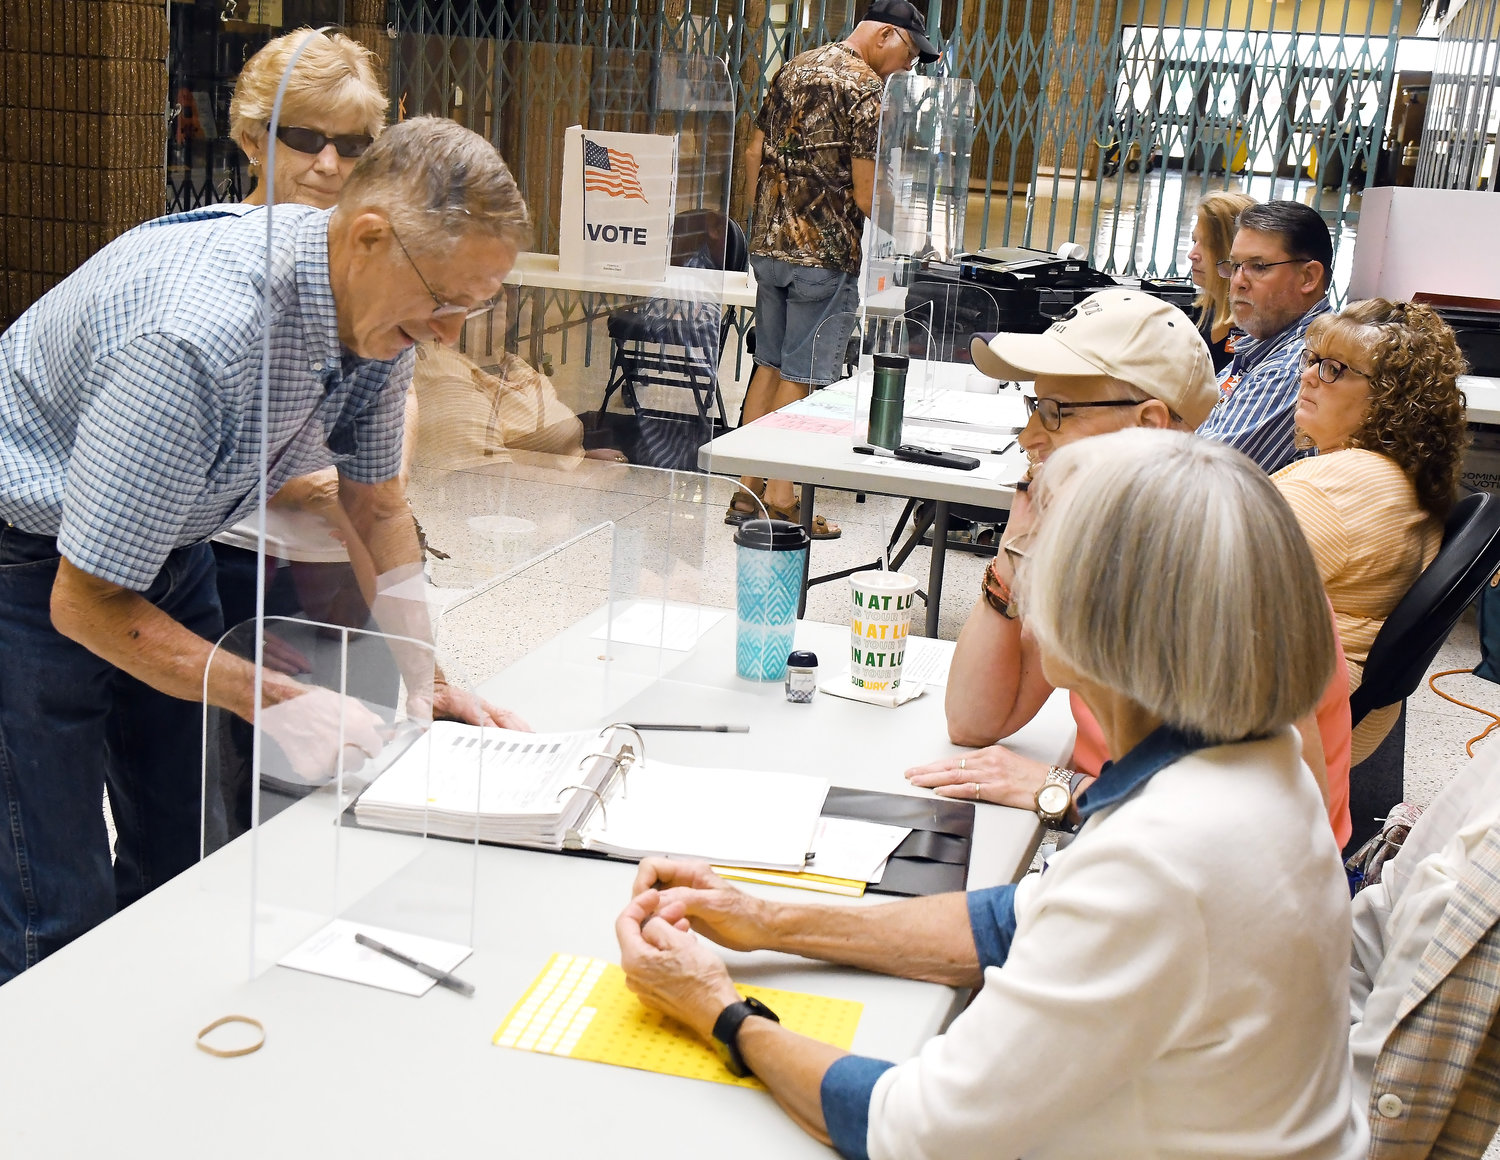 ROGER BILES and his wife, Joyce, sign in to vote early Tuesday afternoon at the Rural Canaan precinct at Owensville High School in the Primary Election. They were in a group of 15 voters in a 20-minute period which brought the turnout to 240 participants.